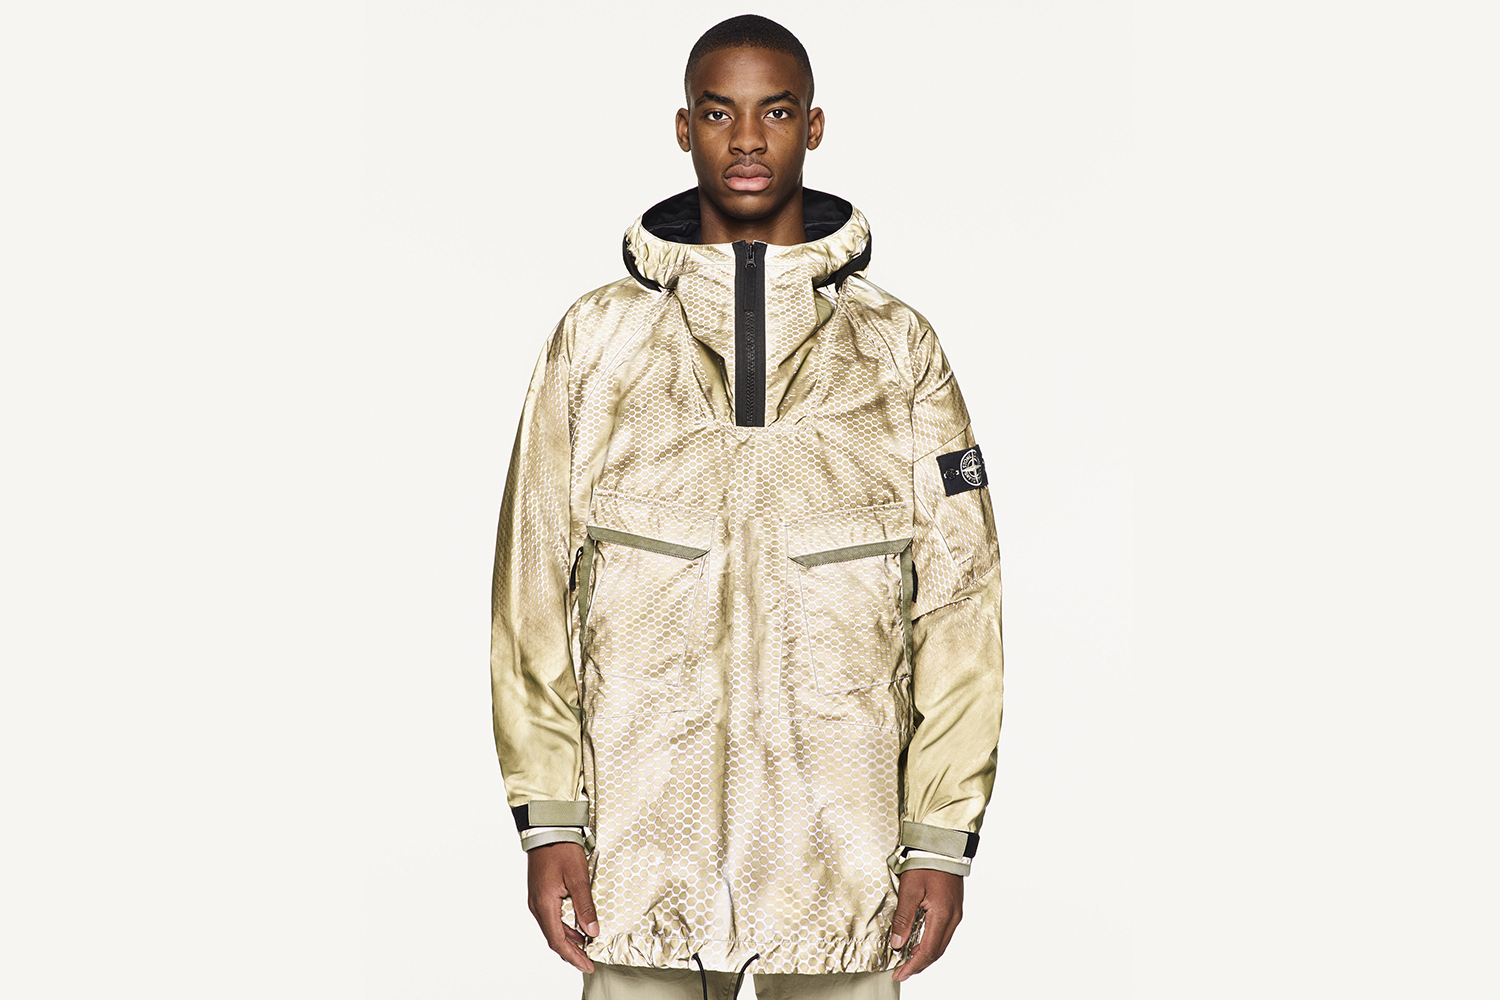 Stone Island Reveals Its Prototype Research Jacket With Laser Print Detailing